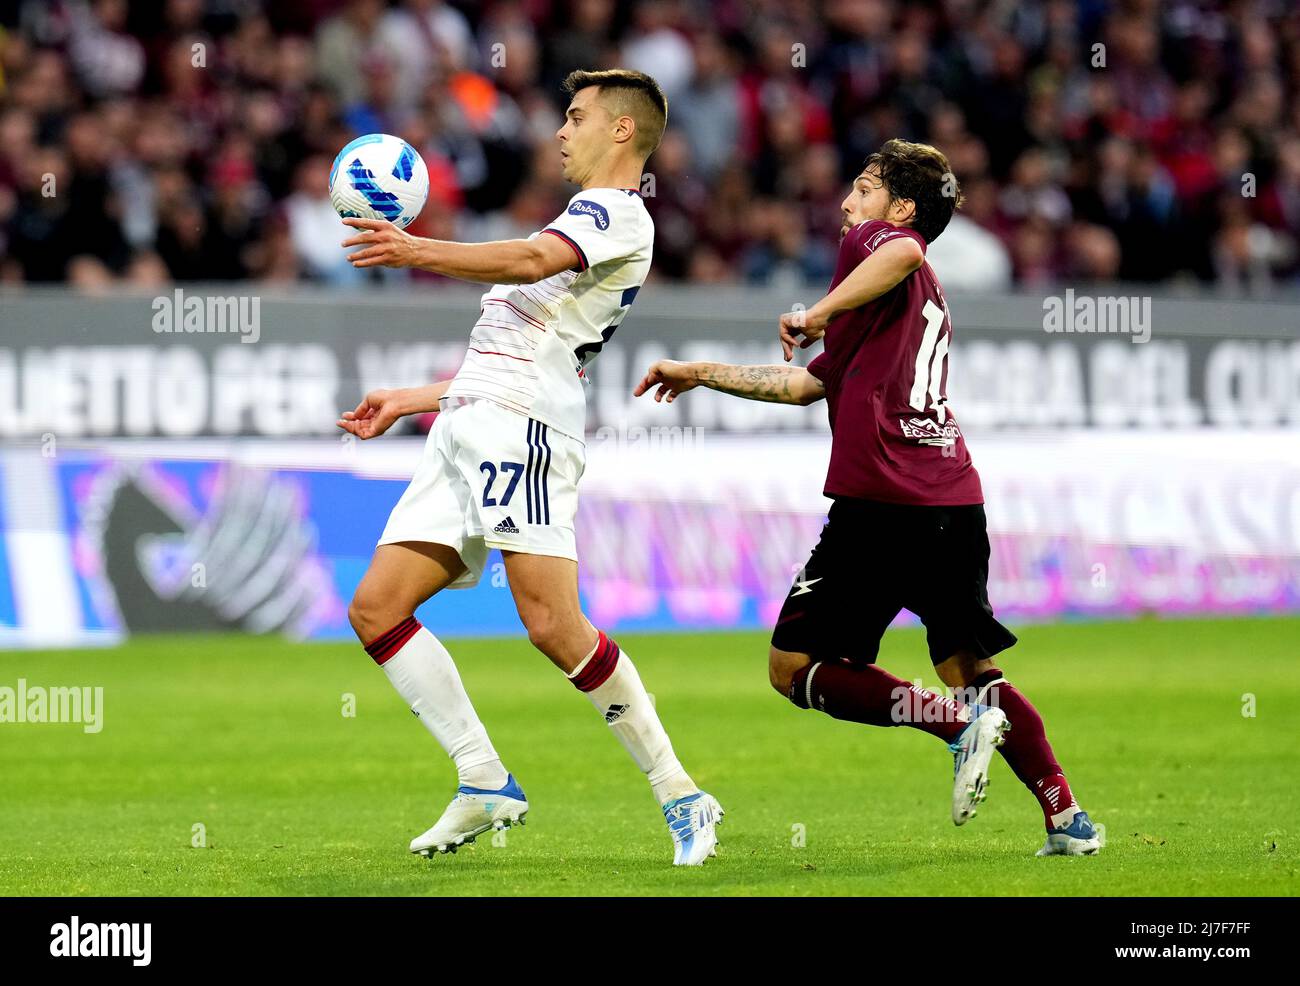 SALERNO, ITALY - MAY 08: Alberto Grassi of Cagliari Calcio competes for the ball with Simone Verdi of US Salernitana ,during the Serie A match between US Salernitana and Cagliari Calcio at Stadio Arechi on May 8, 2022 in Salerno, Italy. (Photo by MB Media ) Stock Photo